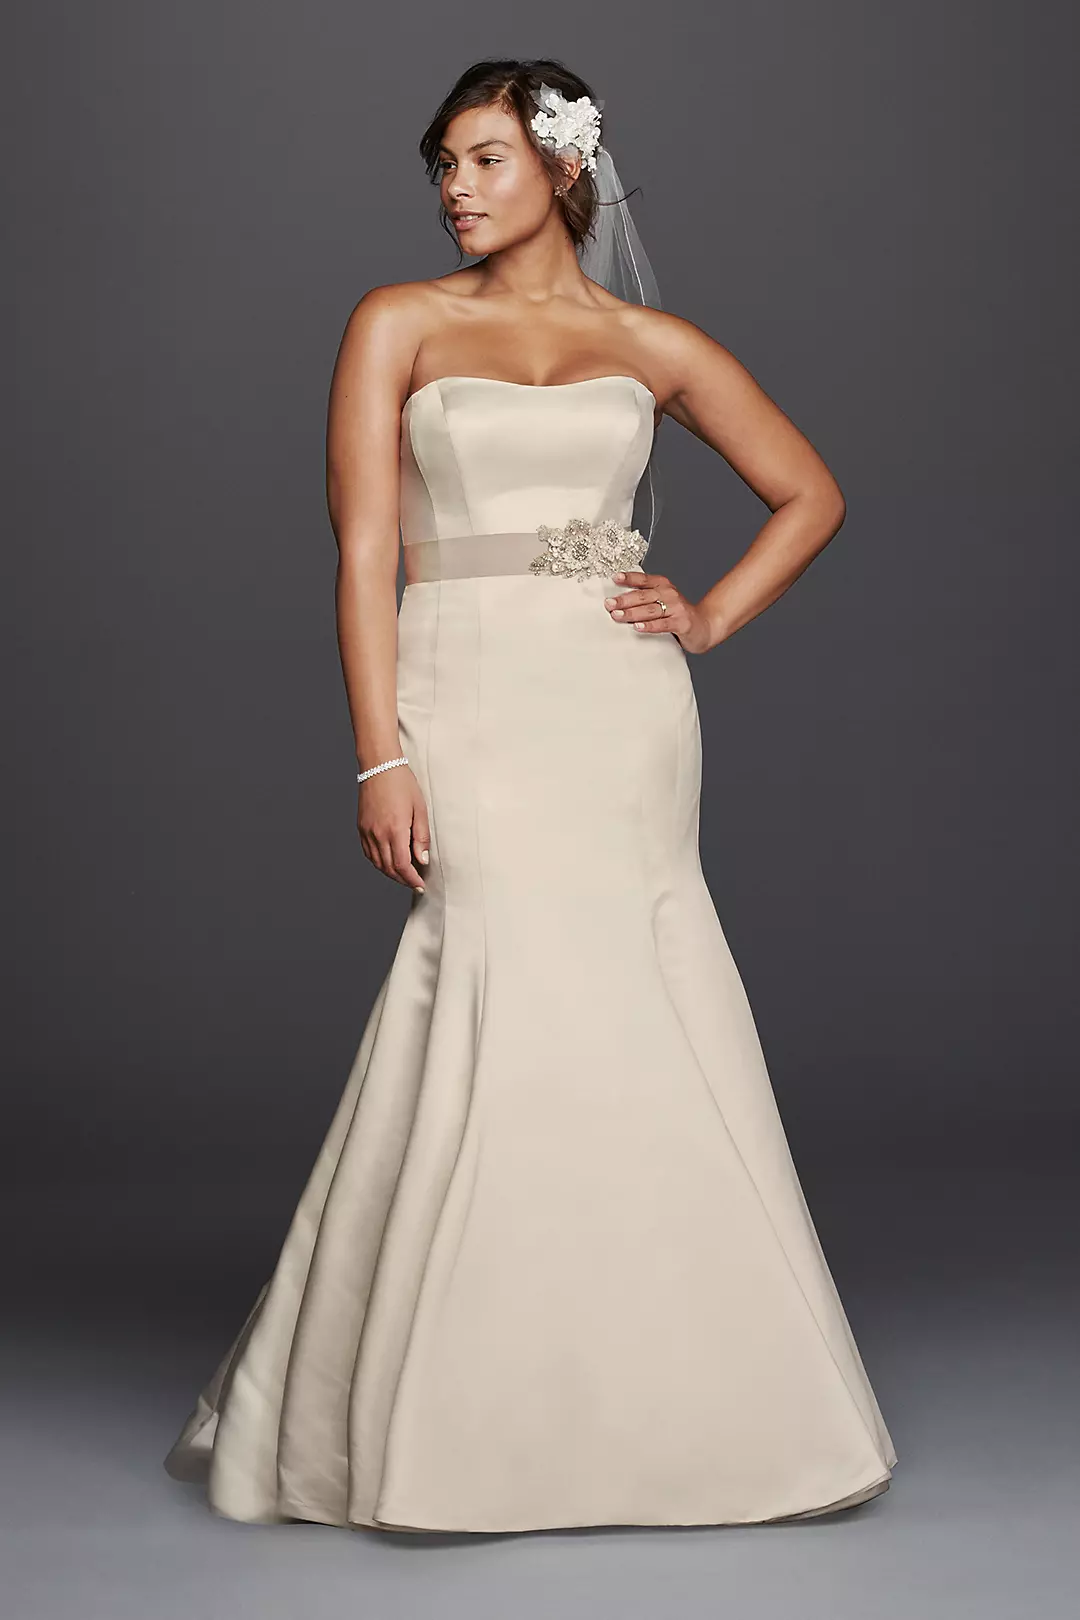 As-Is Plus Size Wedding Dress with Visible Seams Image